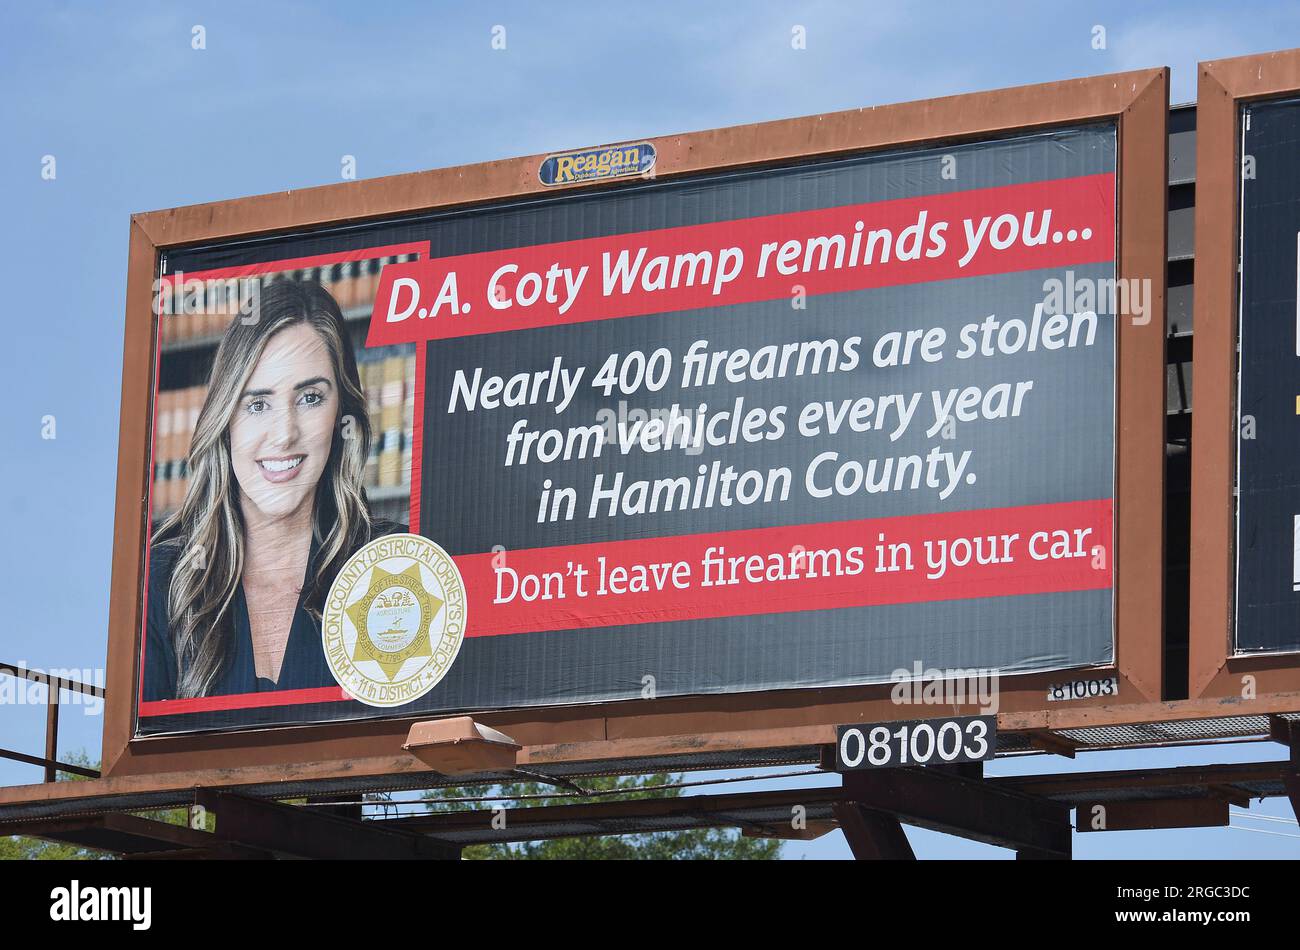 A billboard, featuring District Attorney Coty Wamp, warns of guns 